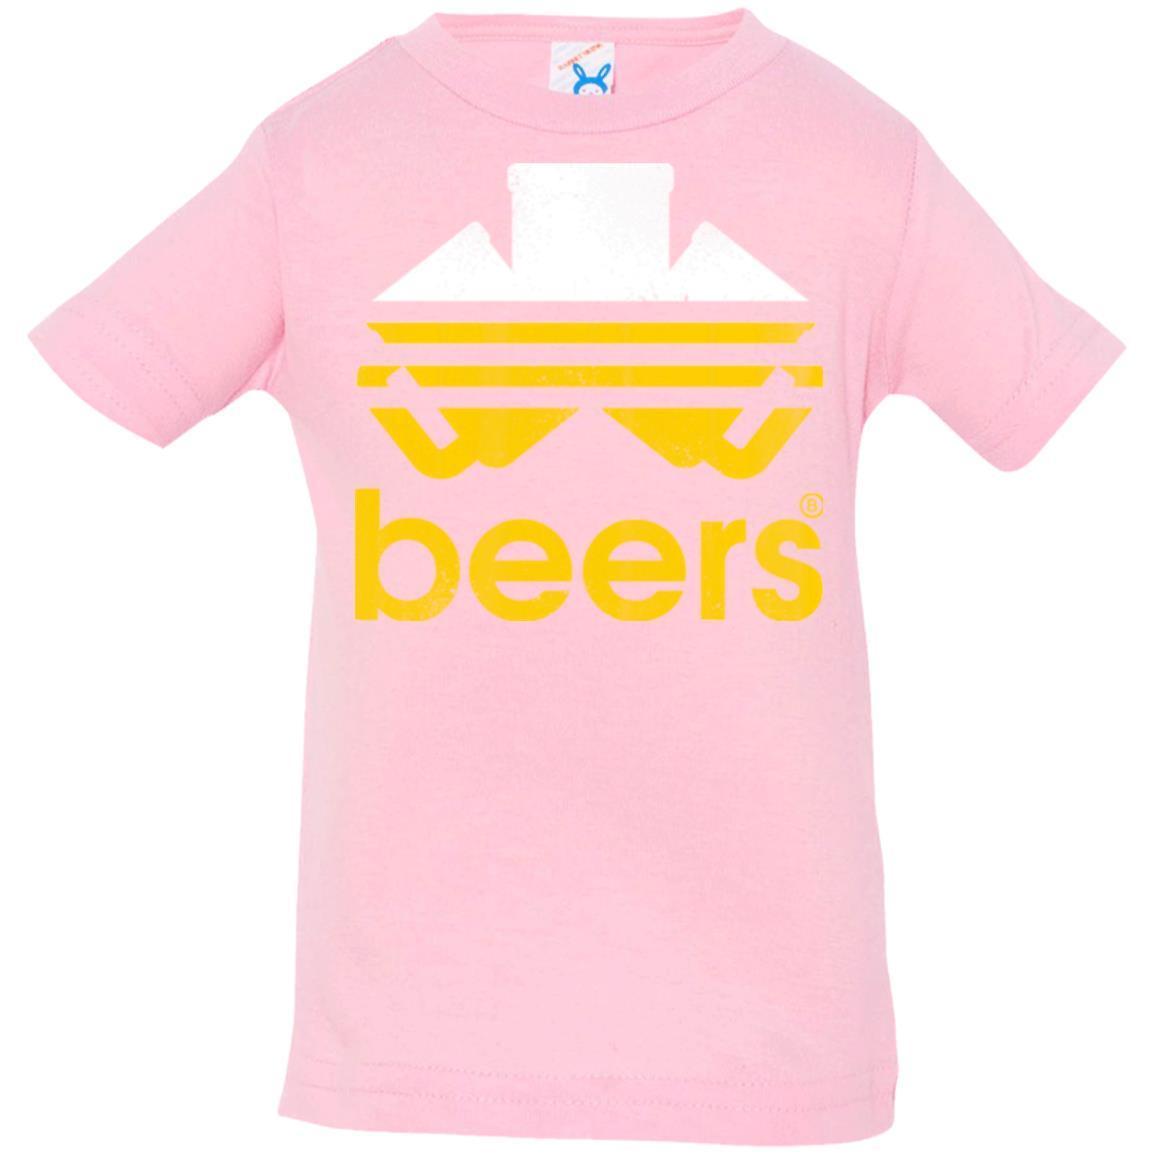 T-Shirts Pink / 6 Months Beers Infant Premium T-Shirt